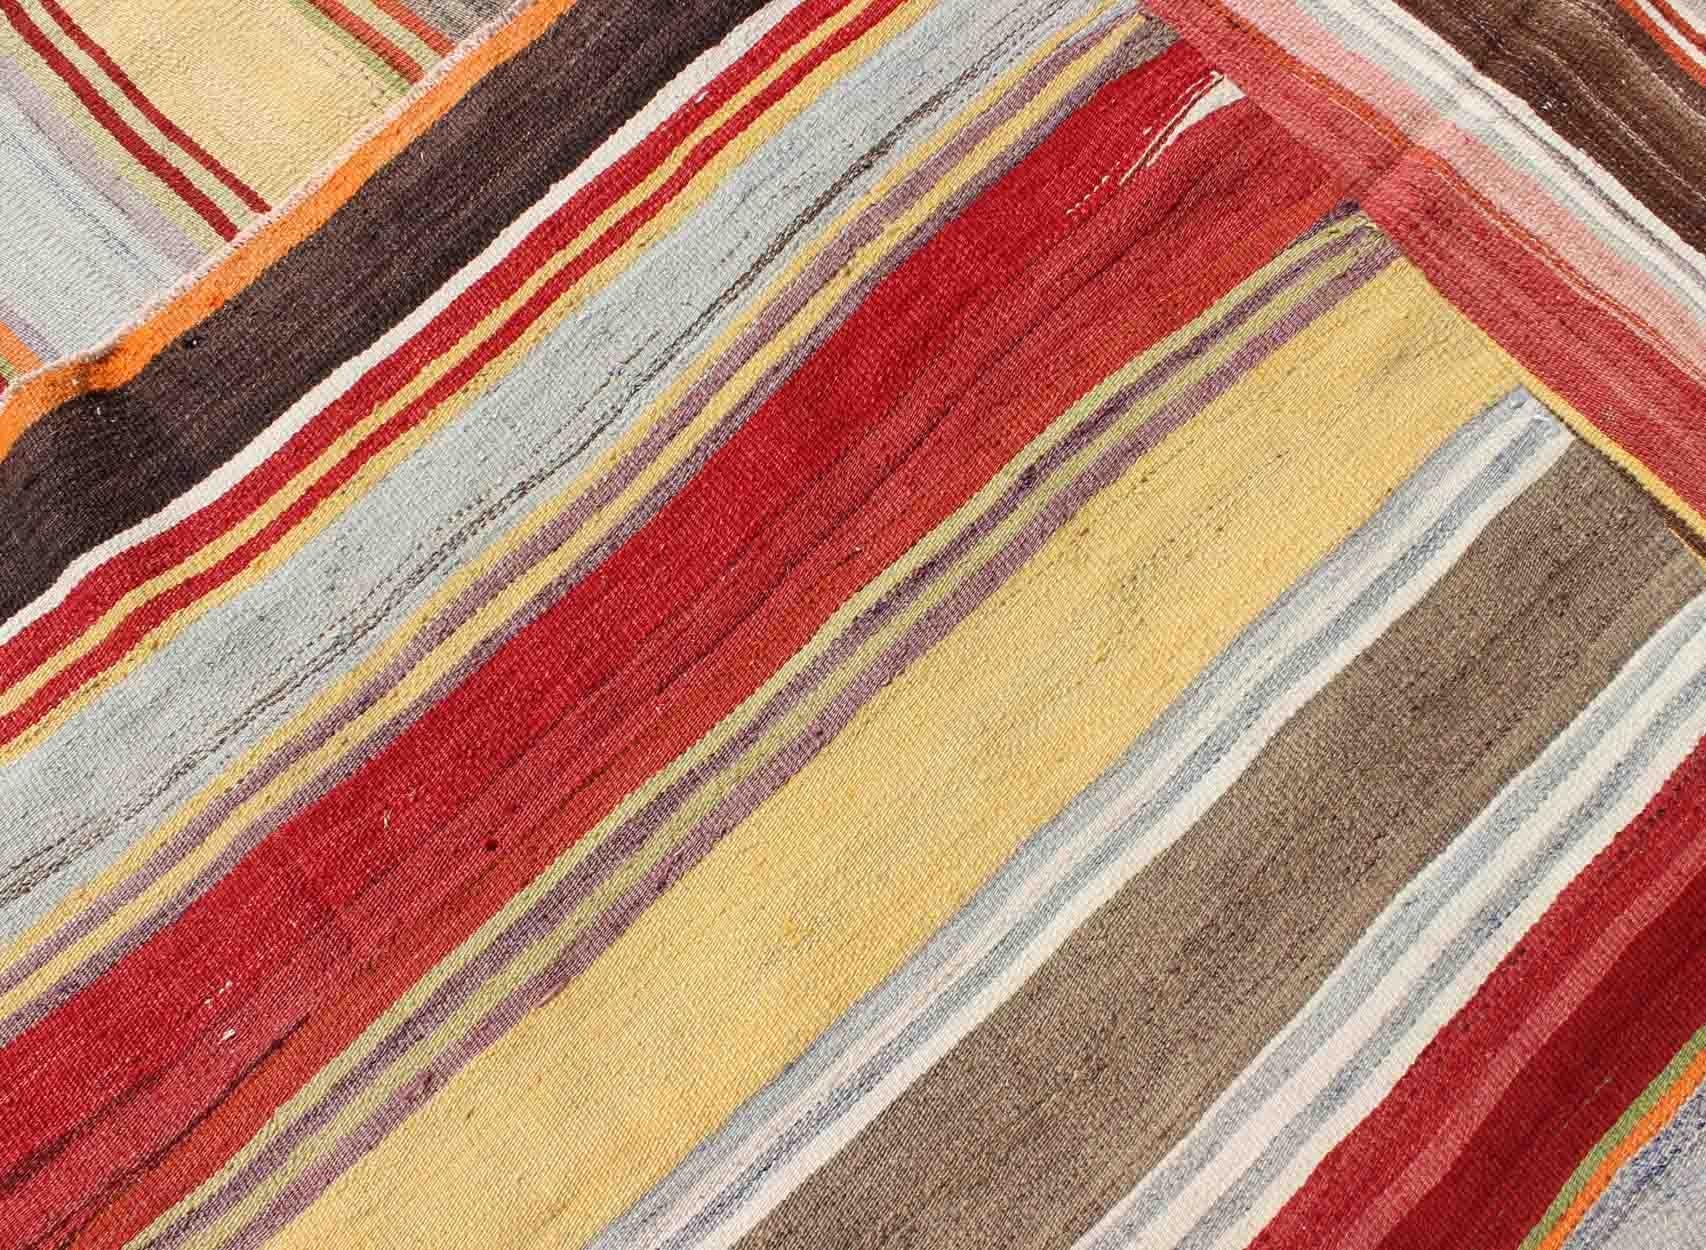 Colorful Large Gallery Runner Kilim Flat-Weave Rug with Horizontal Stripe Design For Sale 3